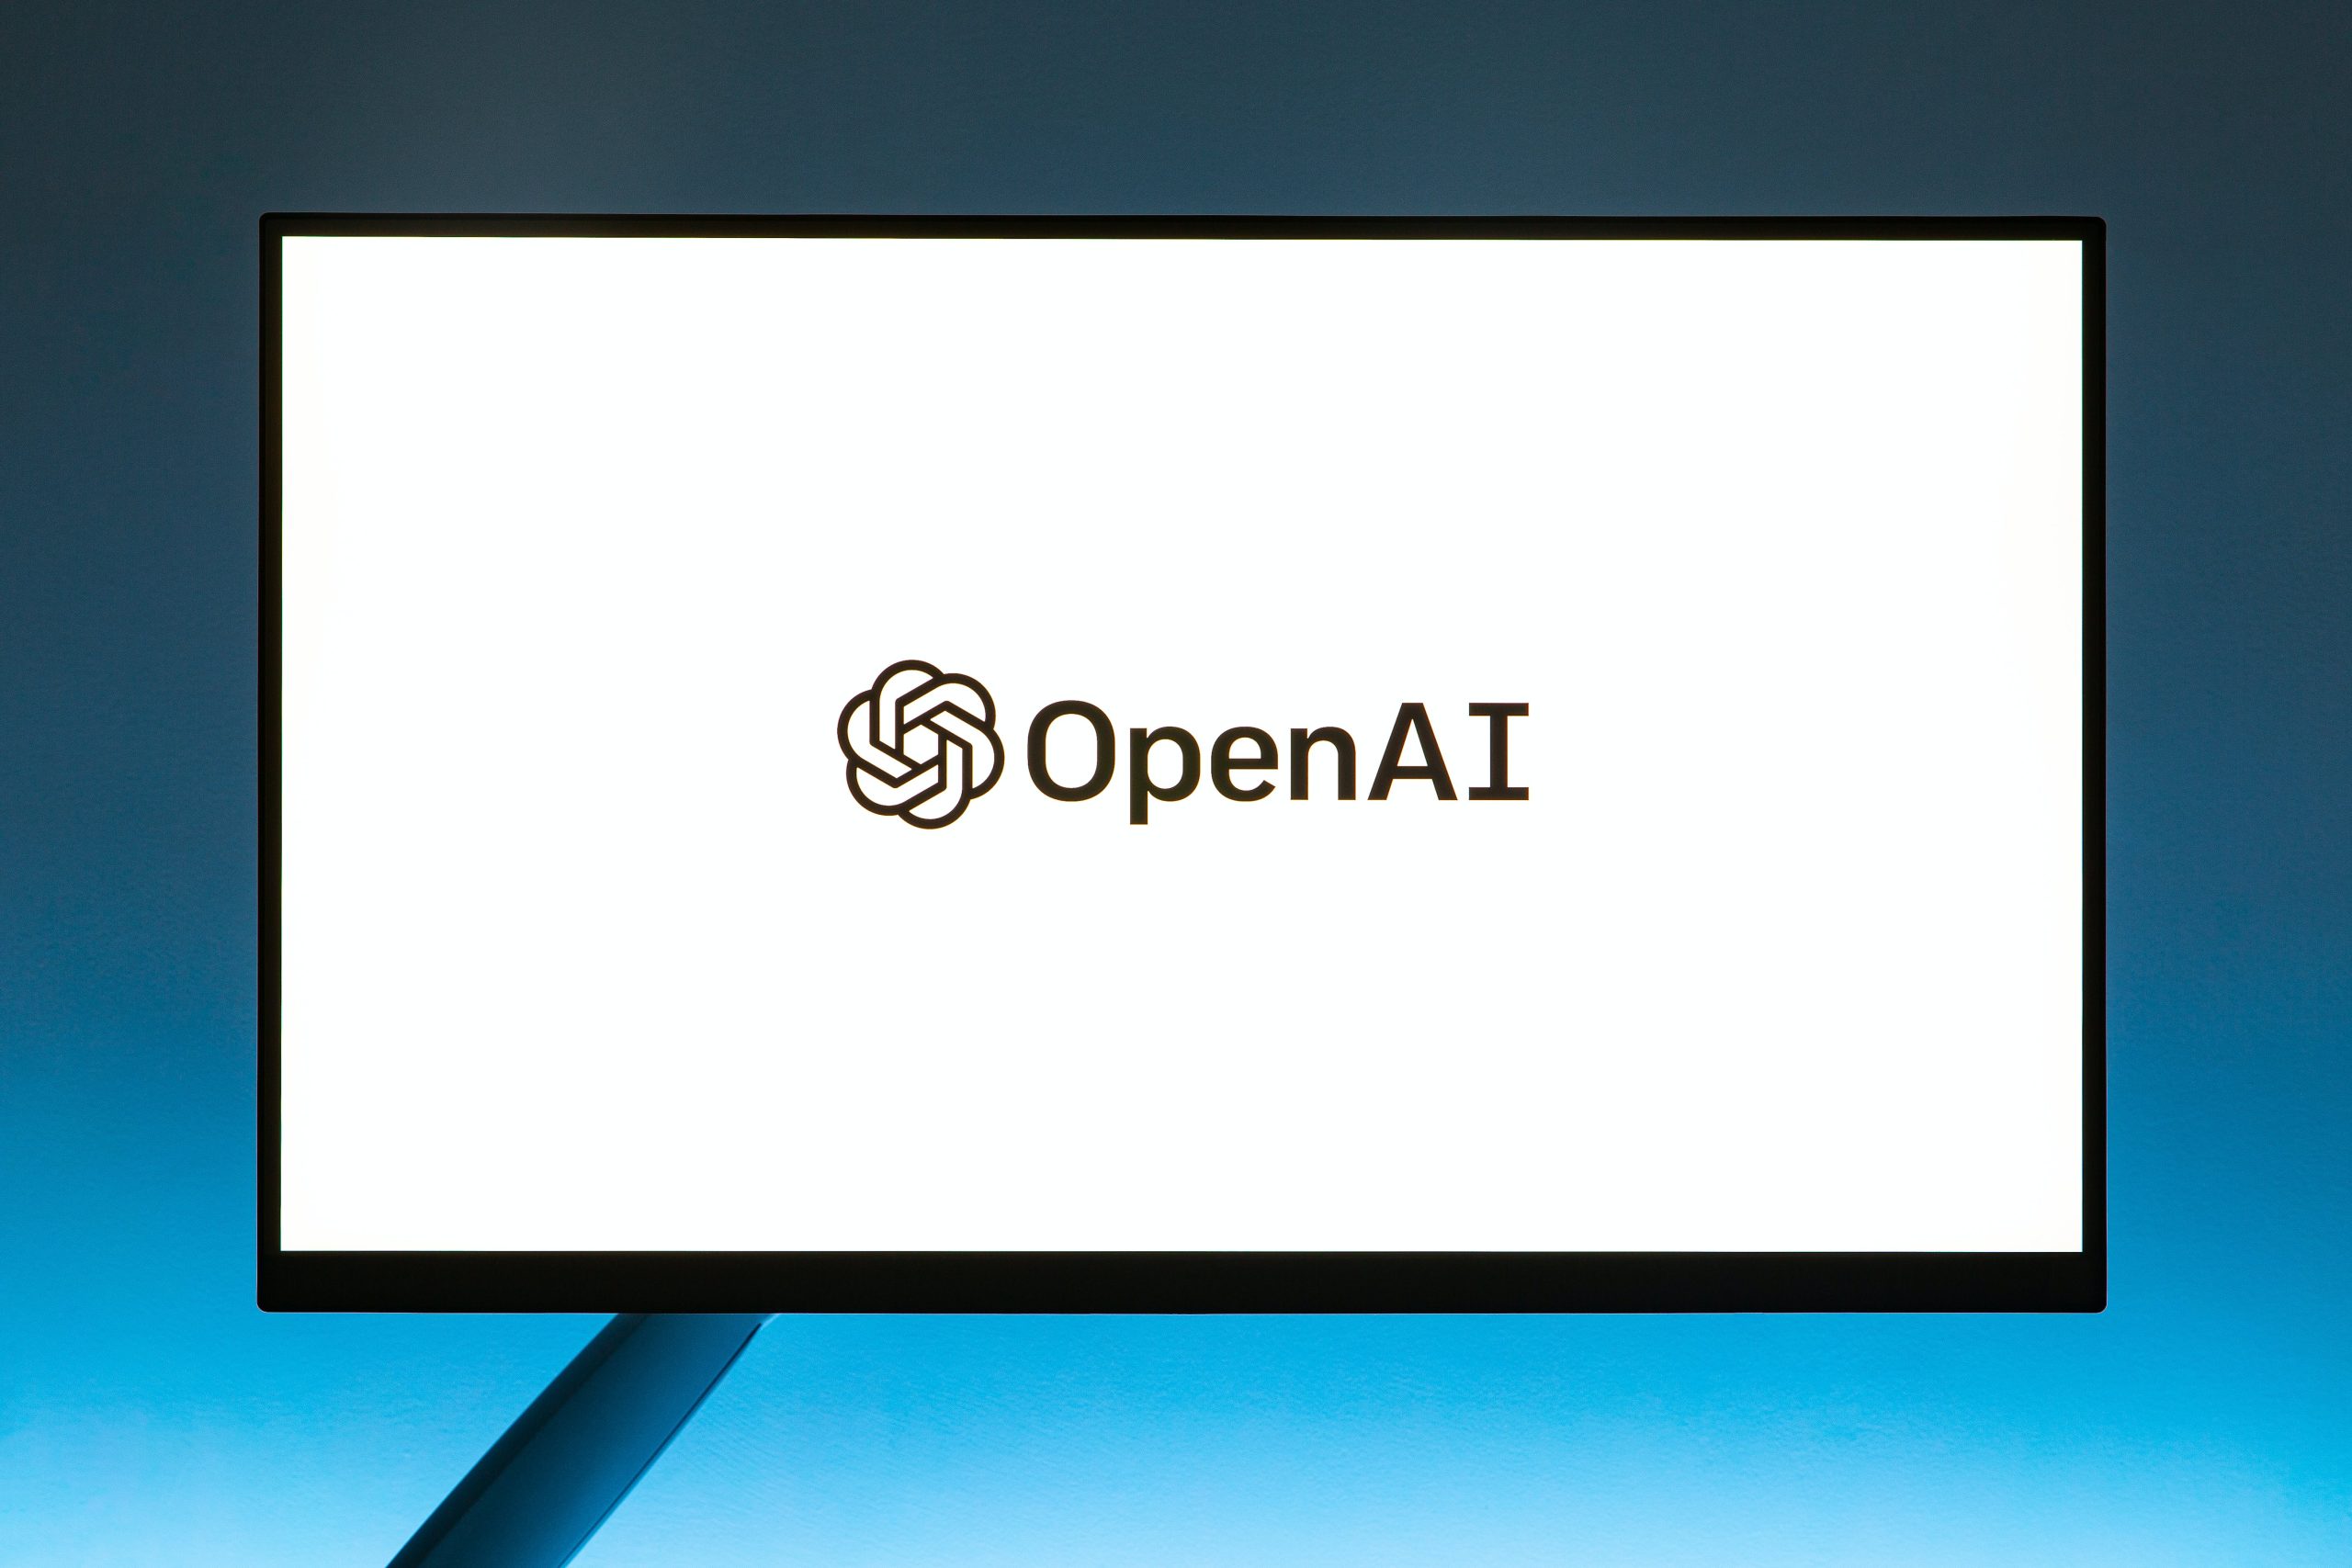 ‘Stop working with Pentagon’ – OpenAI staff face protests